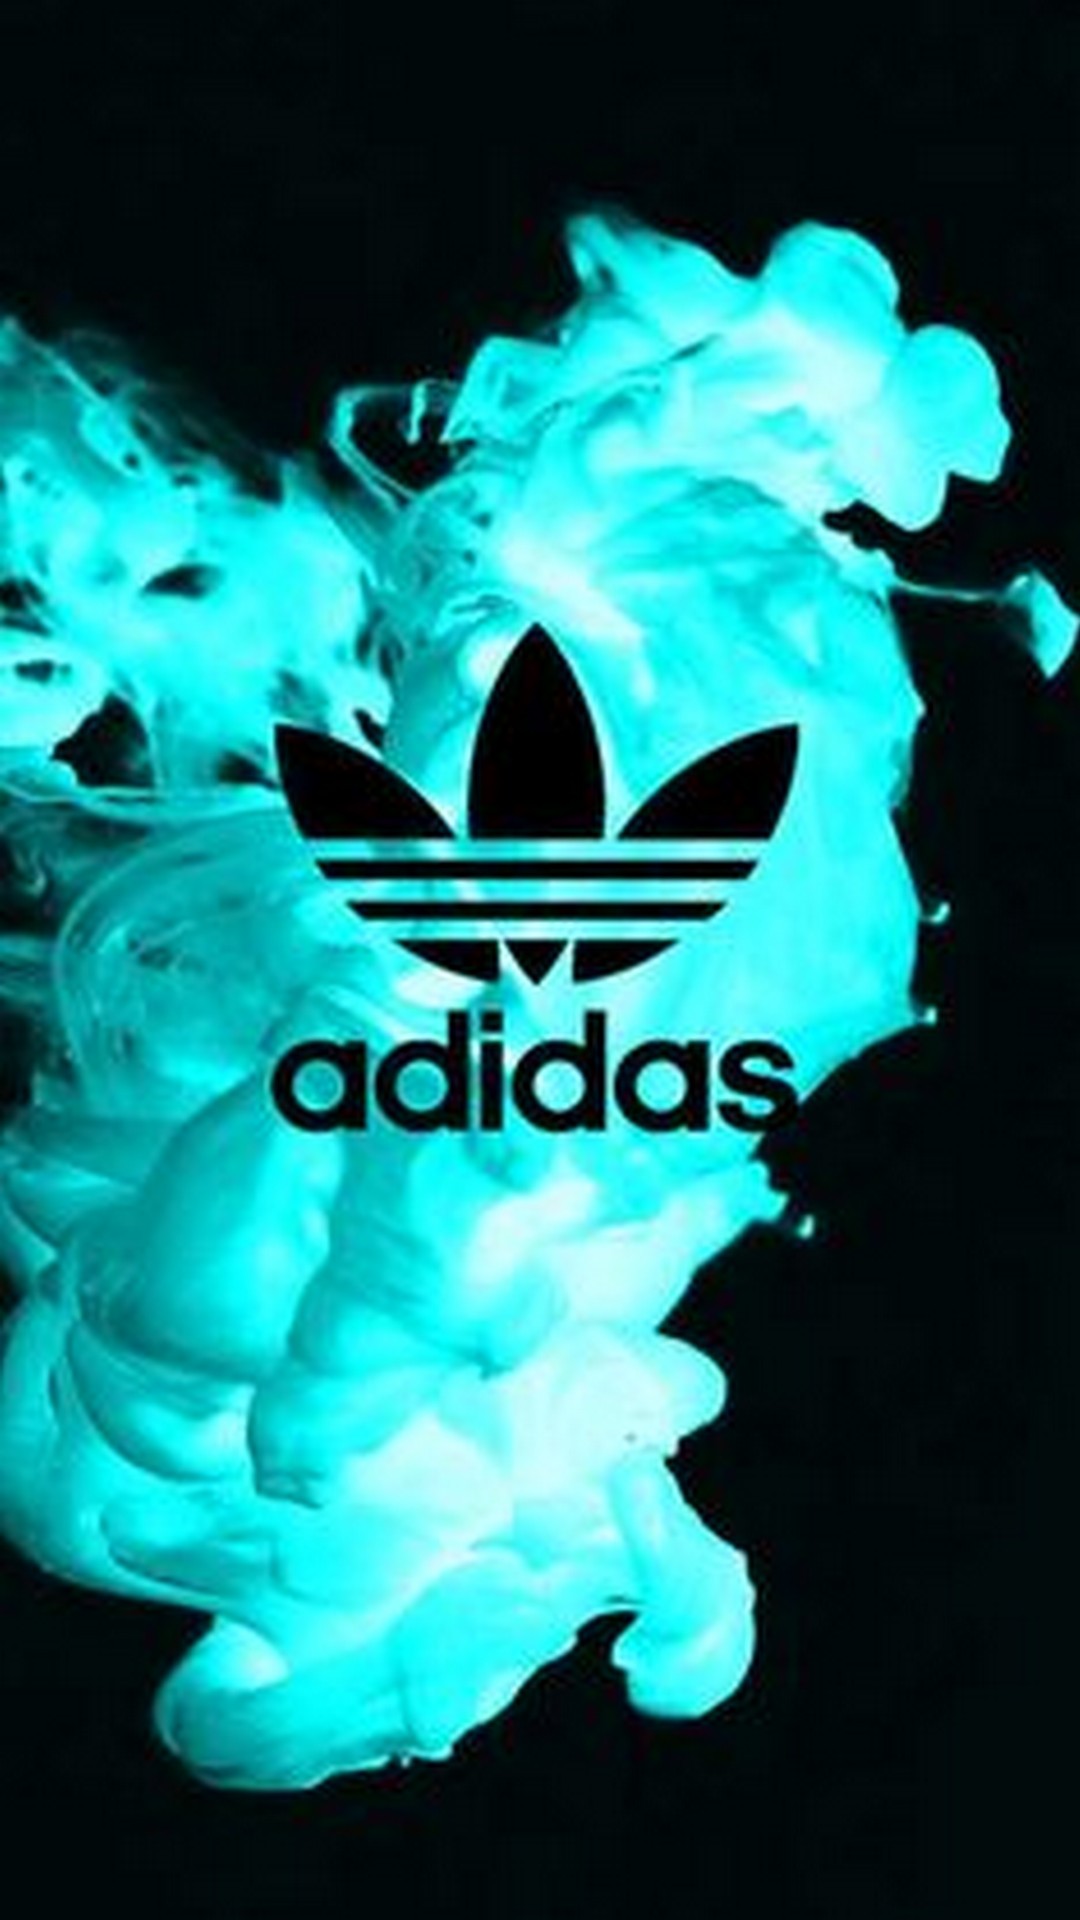 Adidas iPhone 7 Wallpaper with high-resolution 1080x1920 pixel. You can use this wallpaper for your iPhone 5, 6, 7, 8, X, XS, XR backgrounds, Mobile Screensaver, or iPad Lock Screen